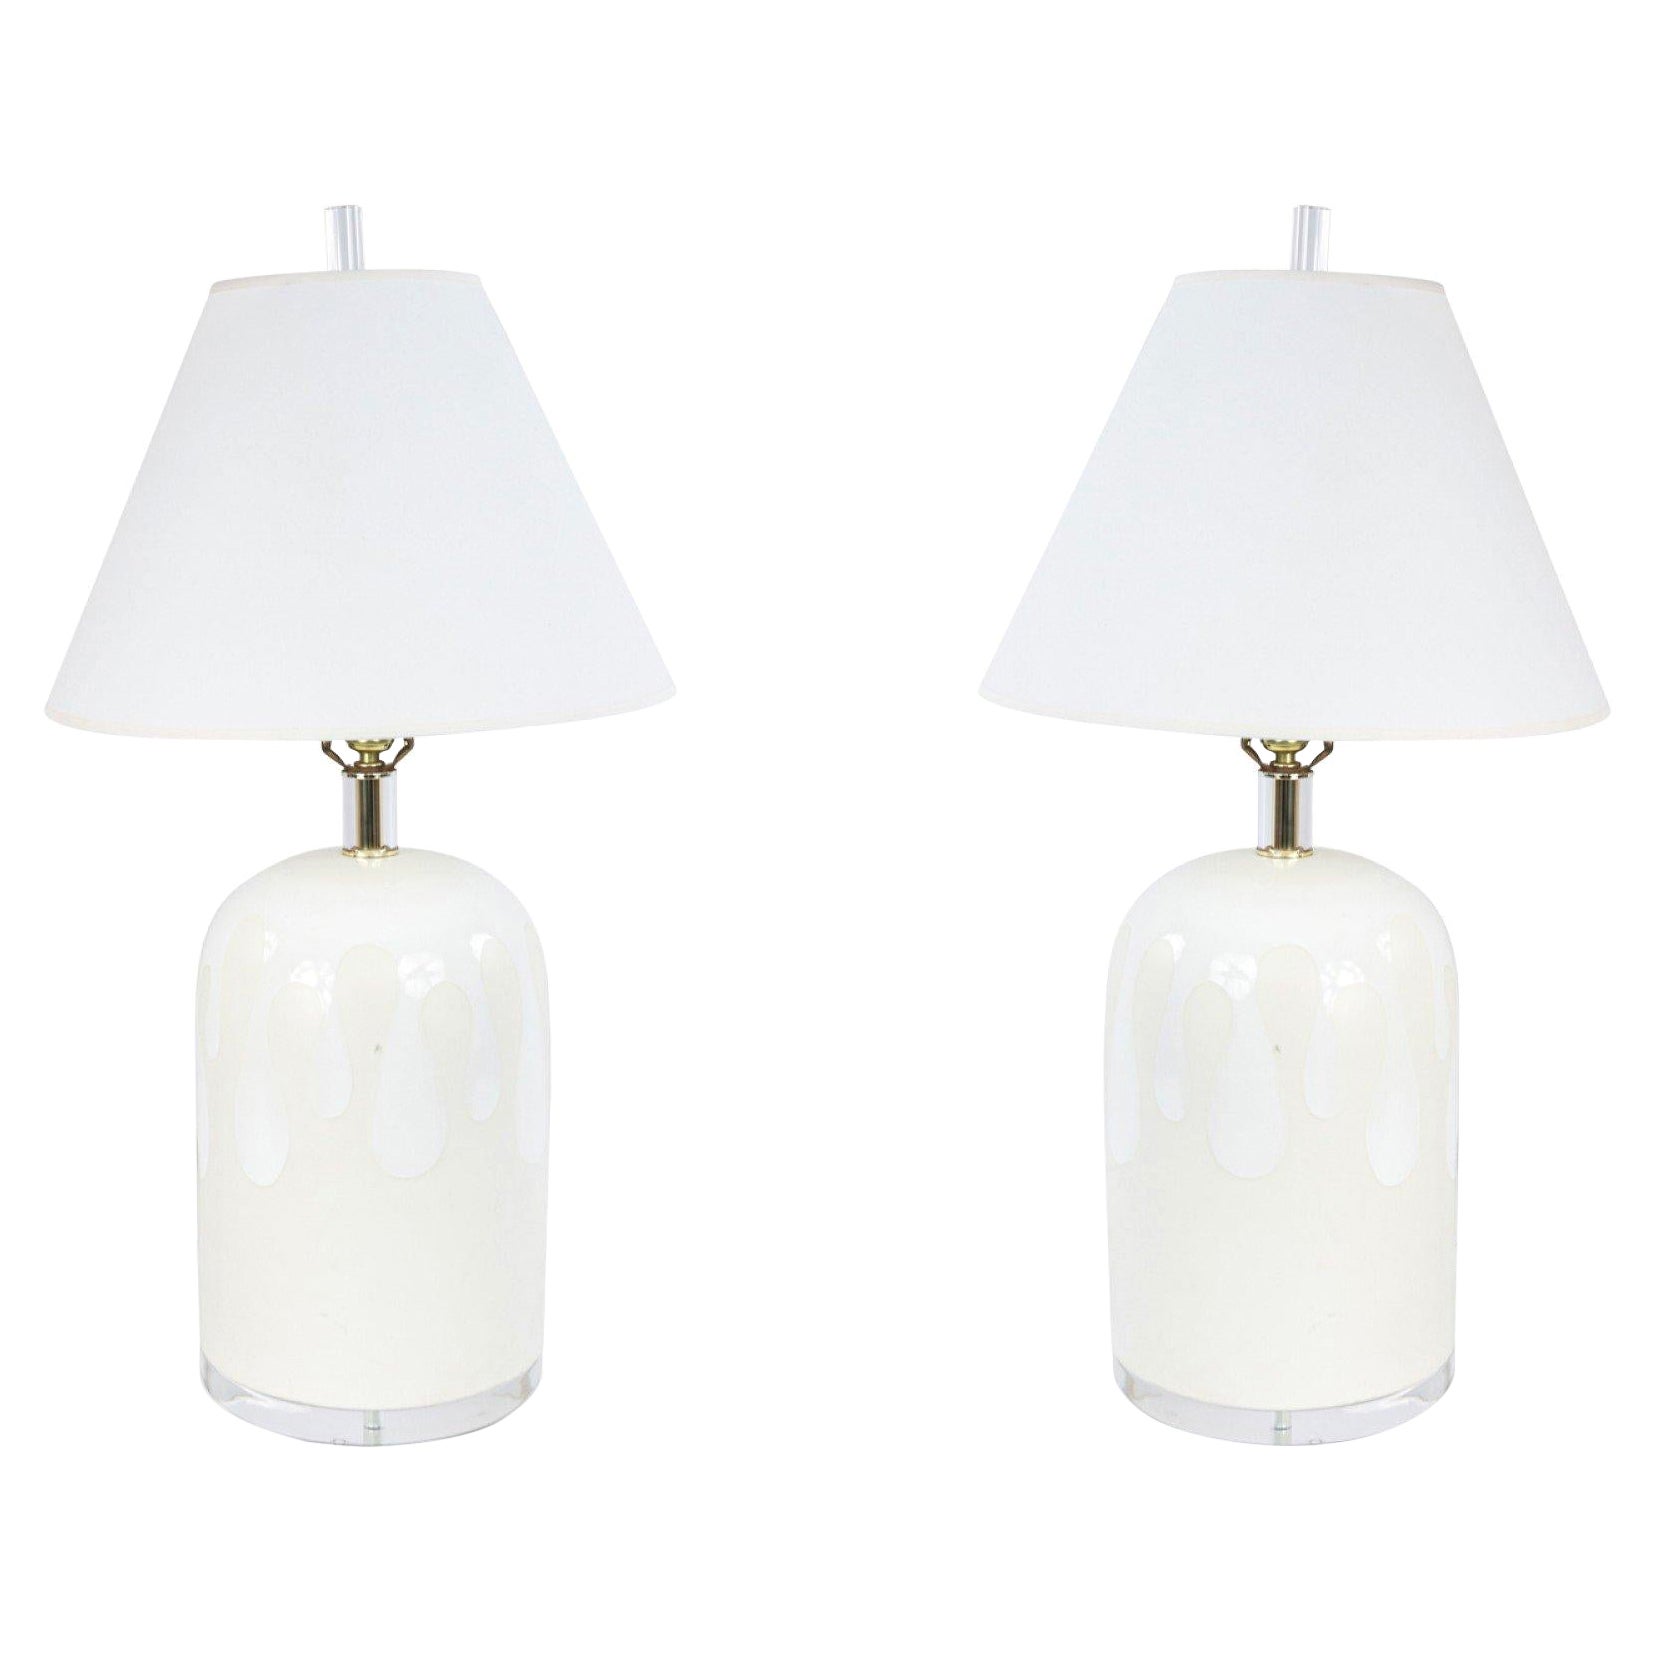 Pair of Mid-Century White Ceramic Table Lamps with Drip Design